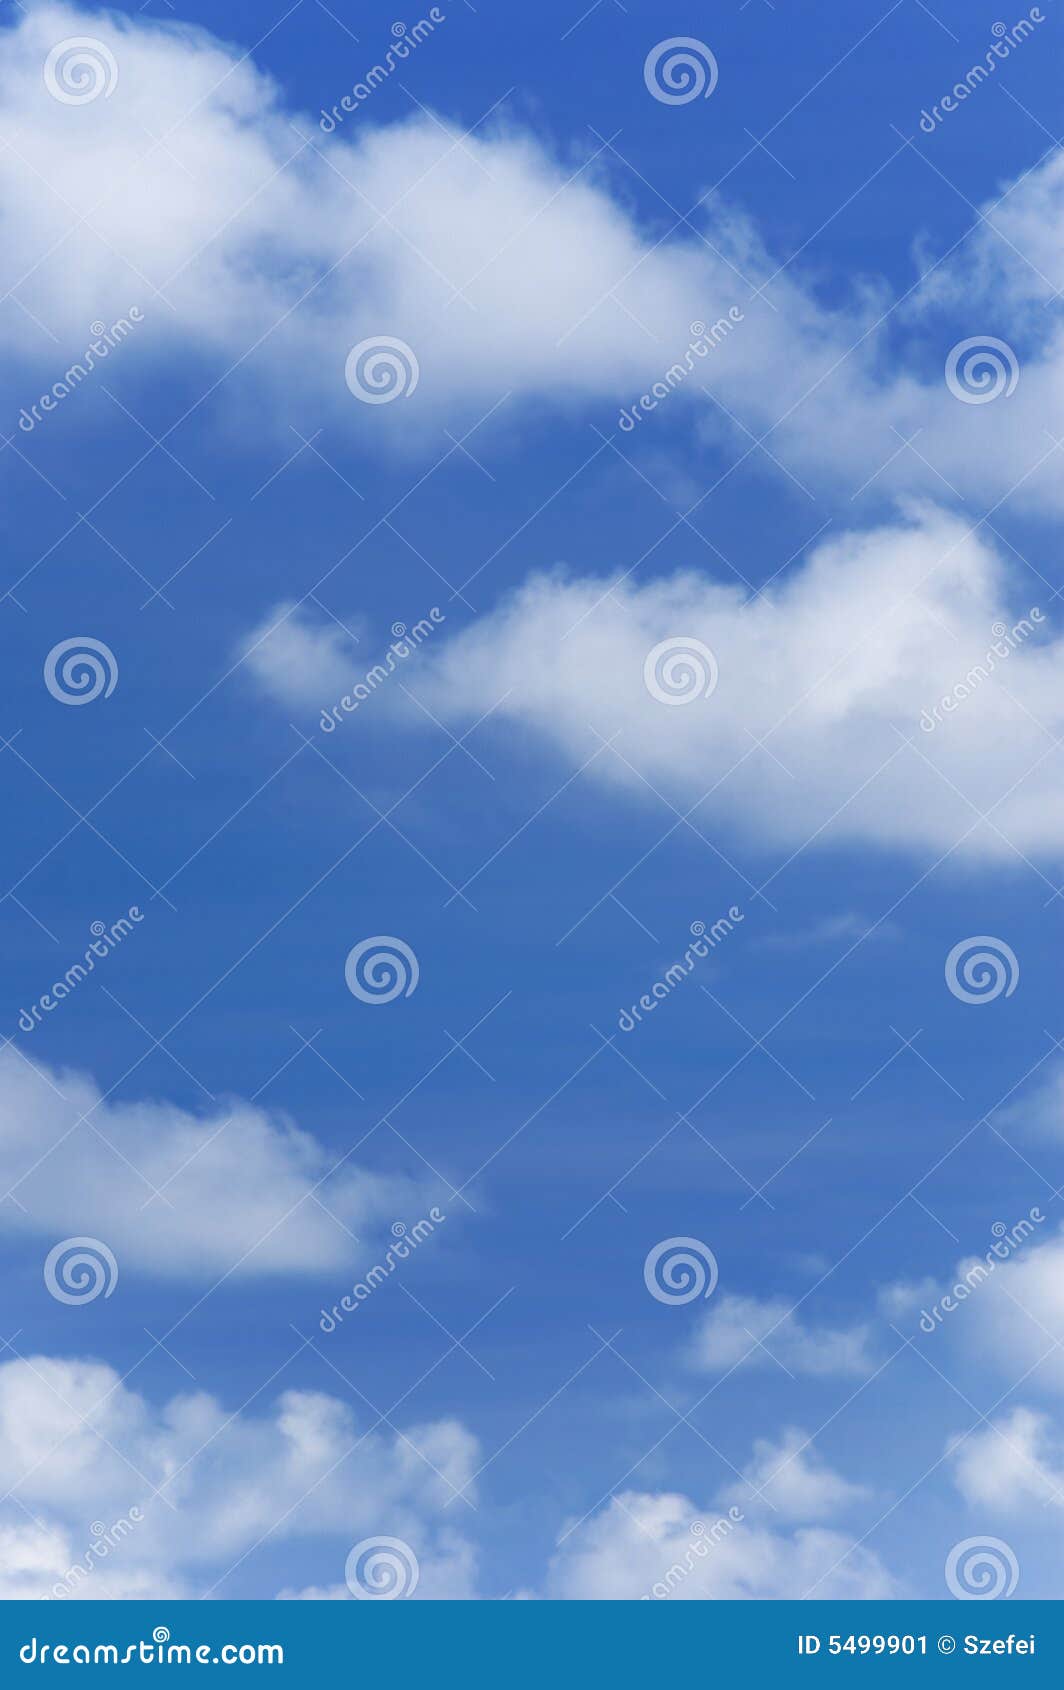 Clouds stock image. Image of dream, abstract, dreams, float - 5499901